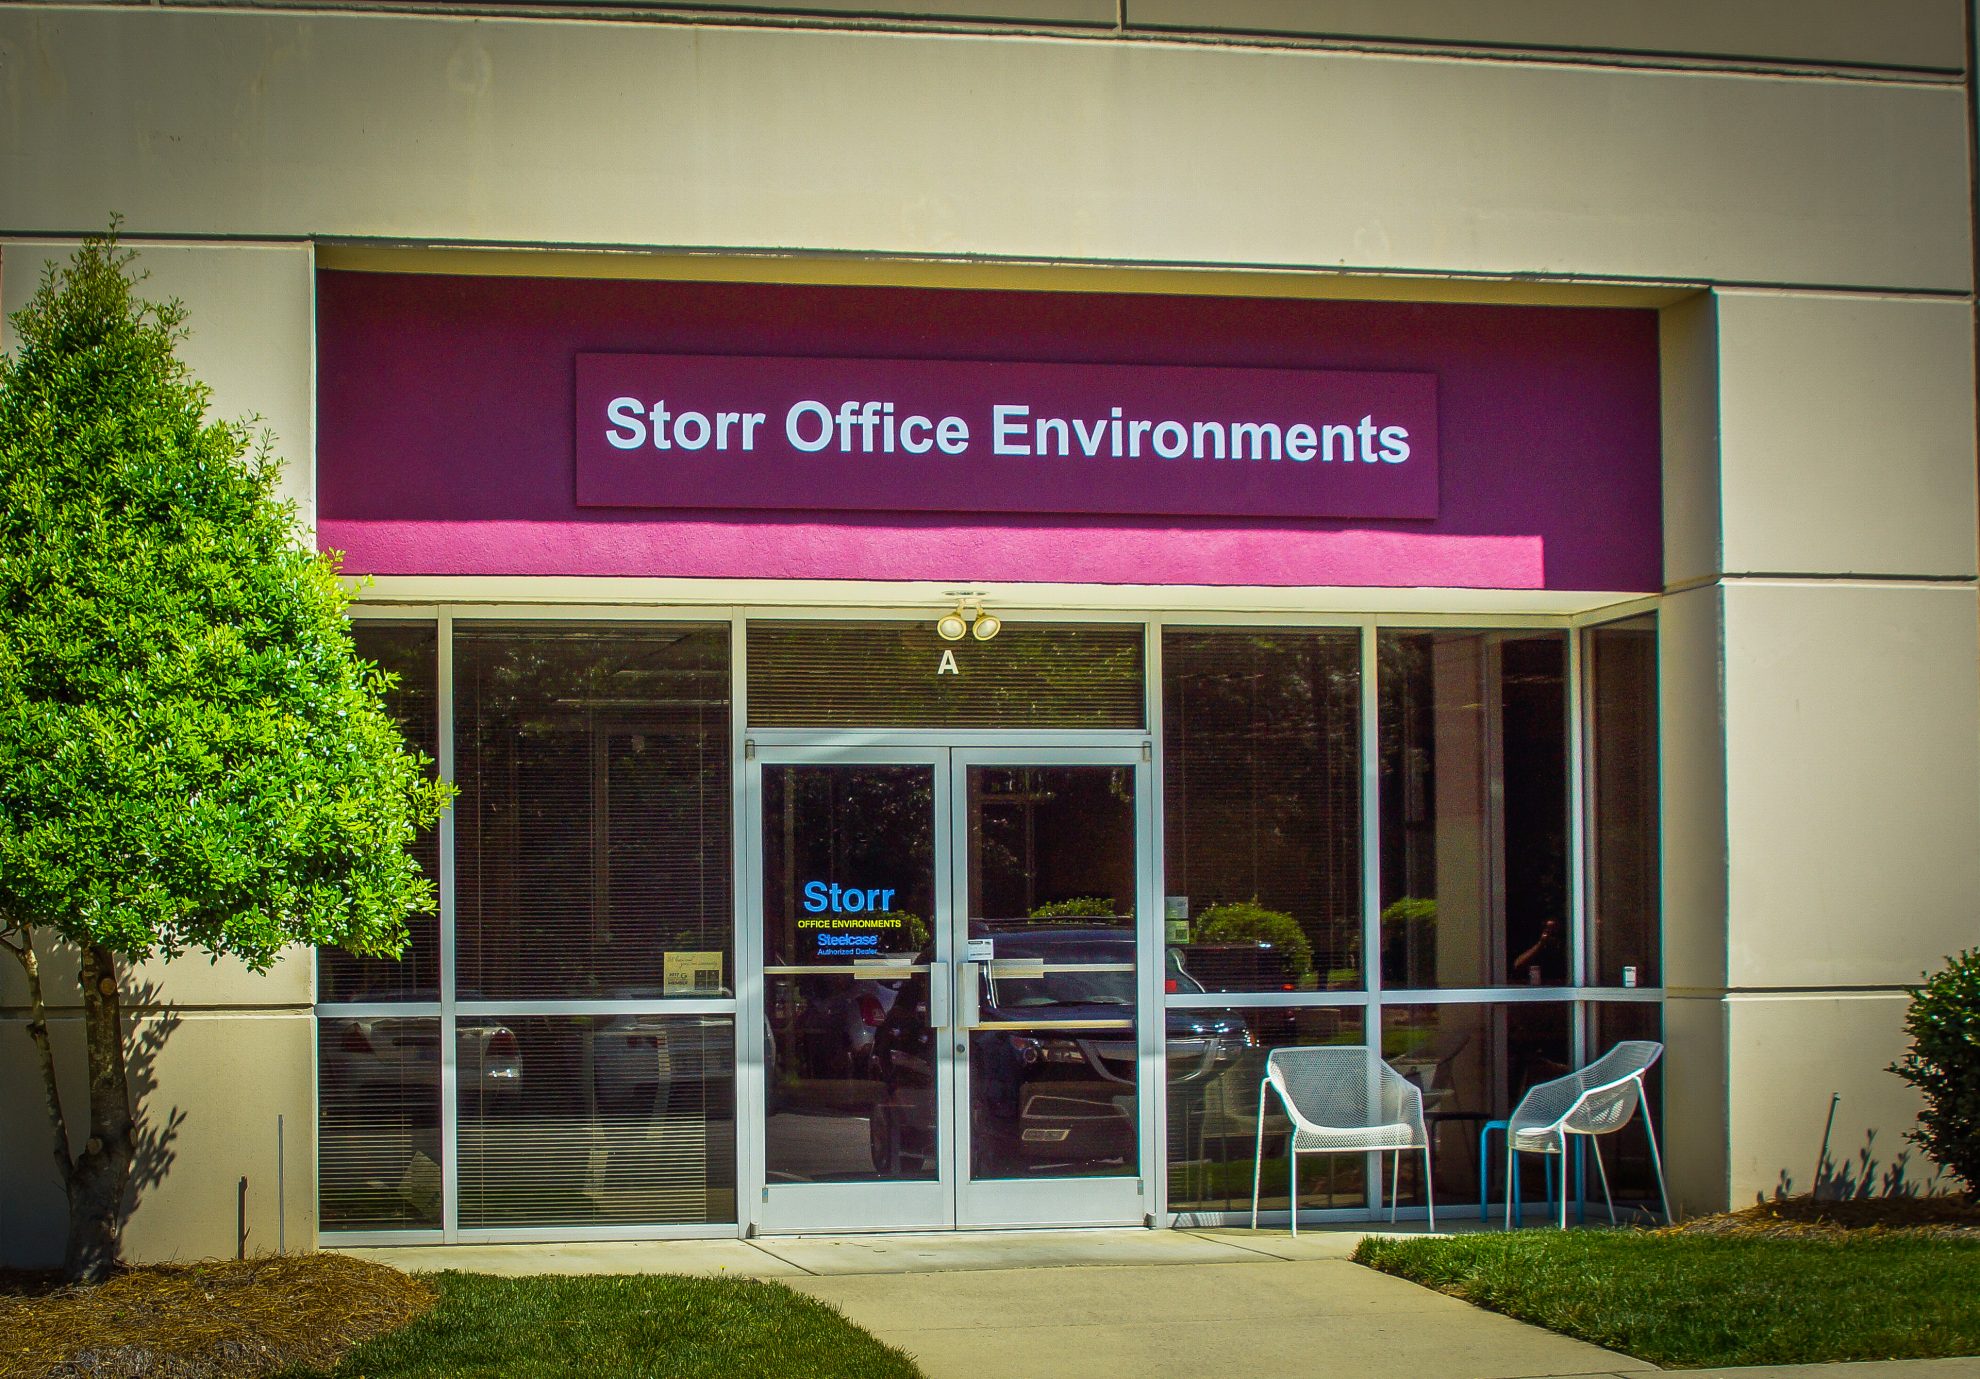 Storr Office Environments - Greensboro and Triad